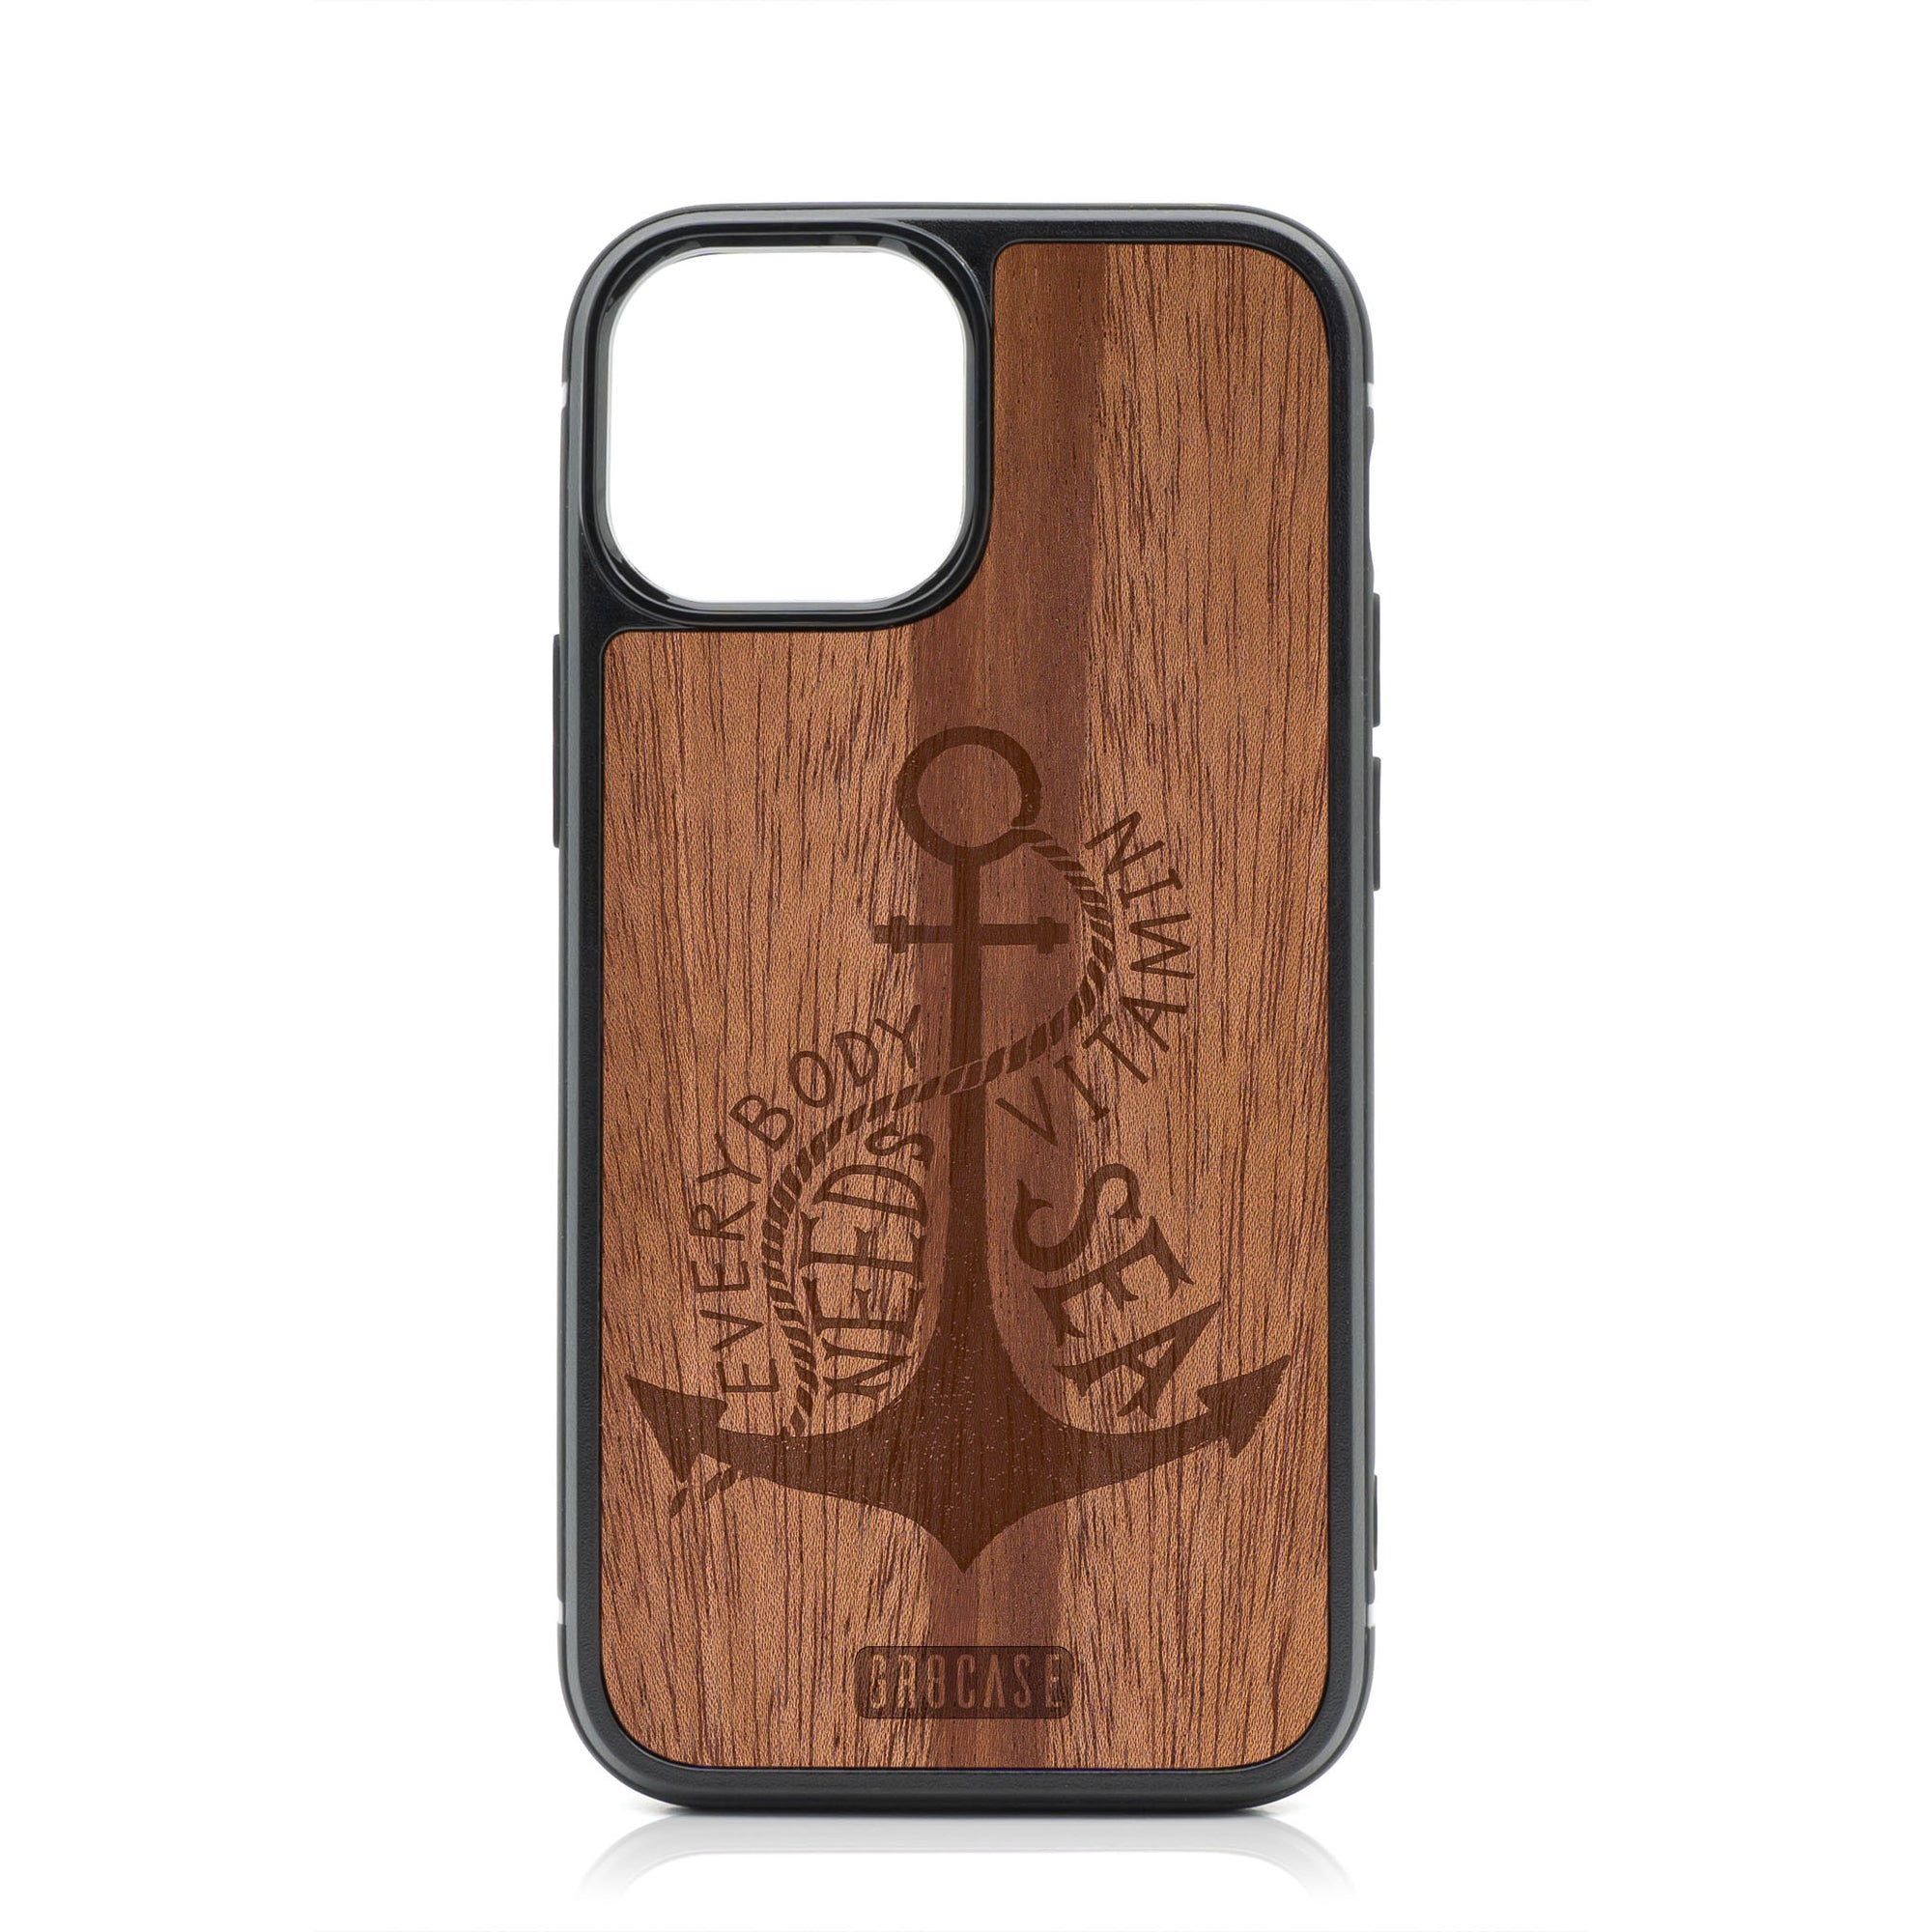 Everybody Needs Vitamin Sea (Anchor) Design Wood Case For iPhone 13 Mini